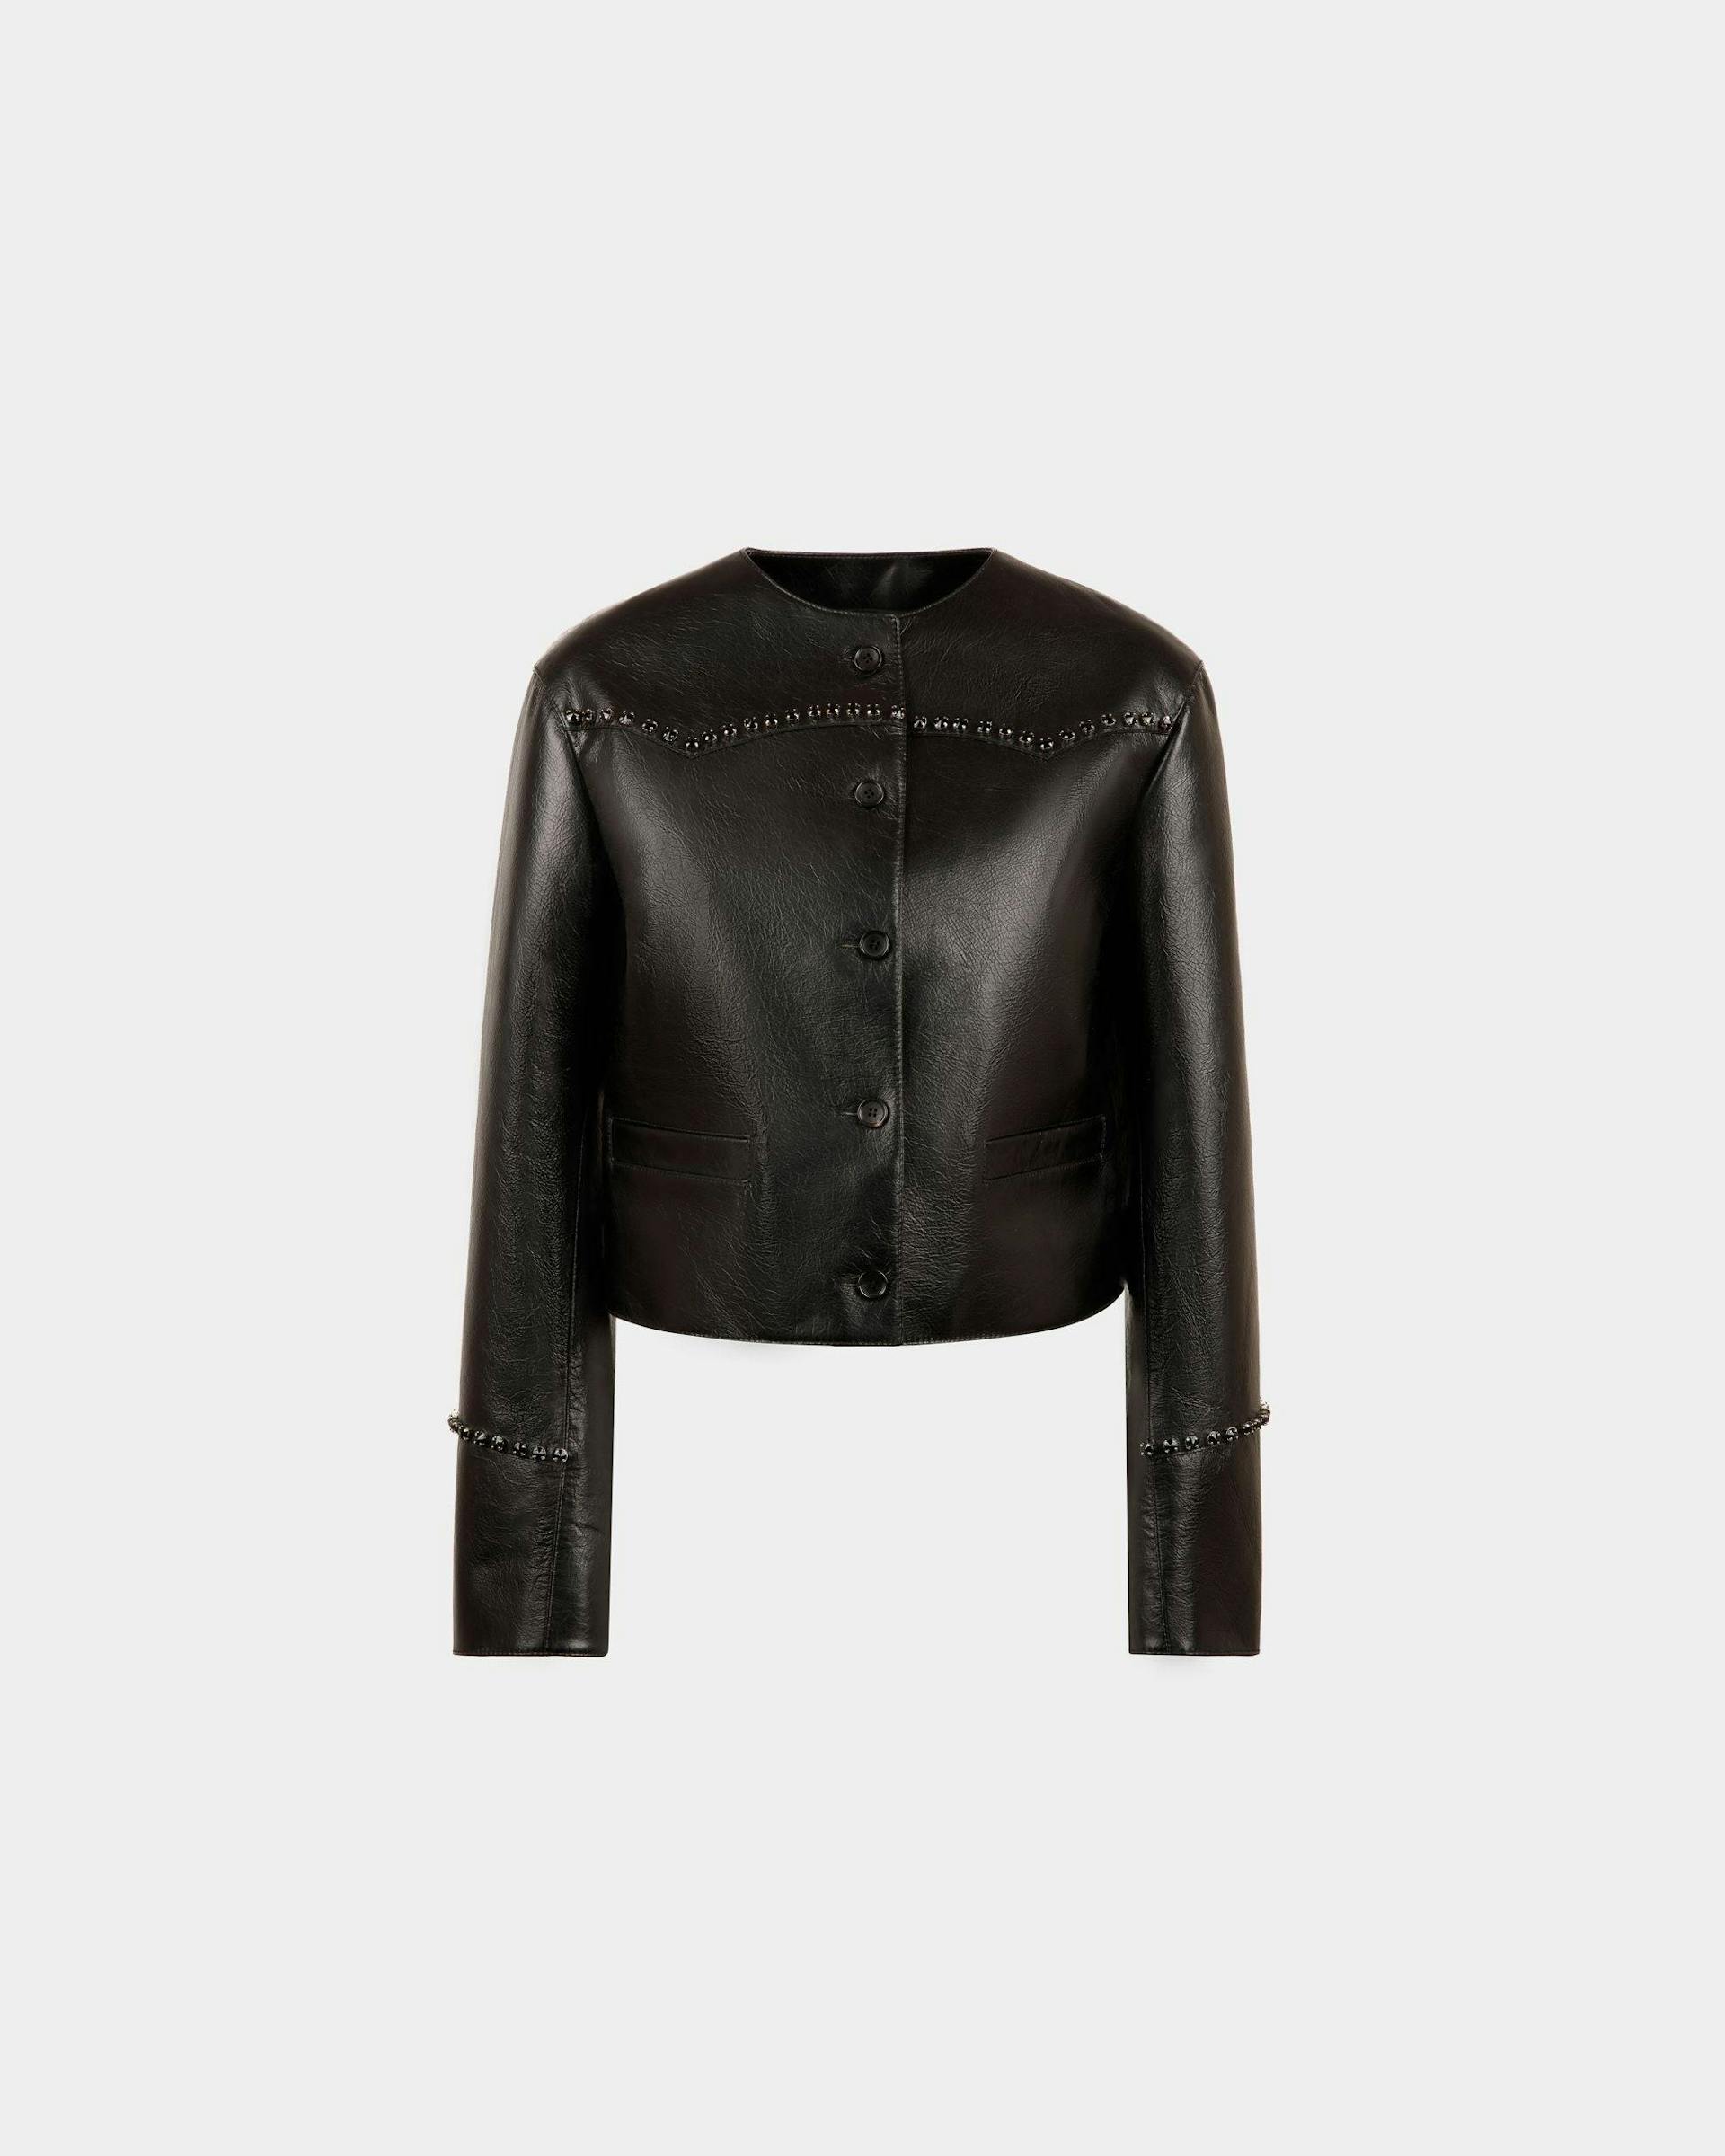 Women's Jacket in Black Leather | Bally | Still Life Front